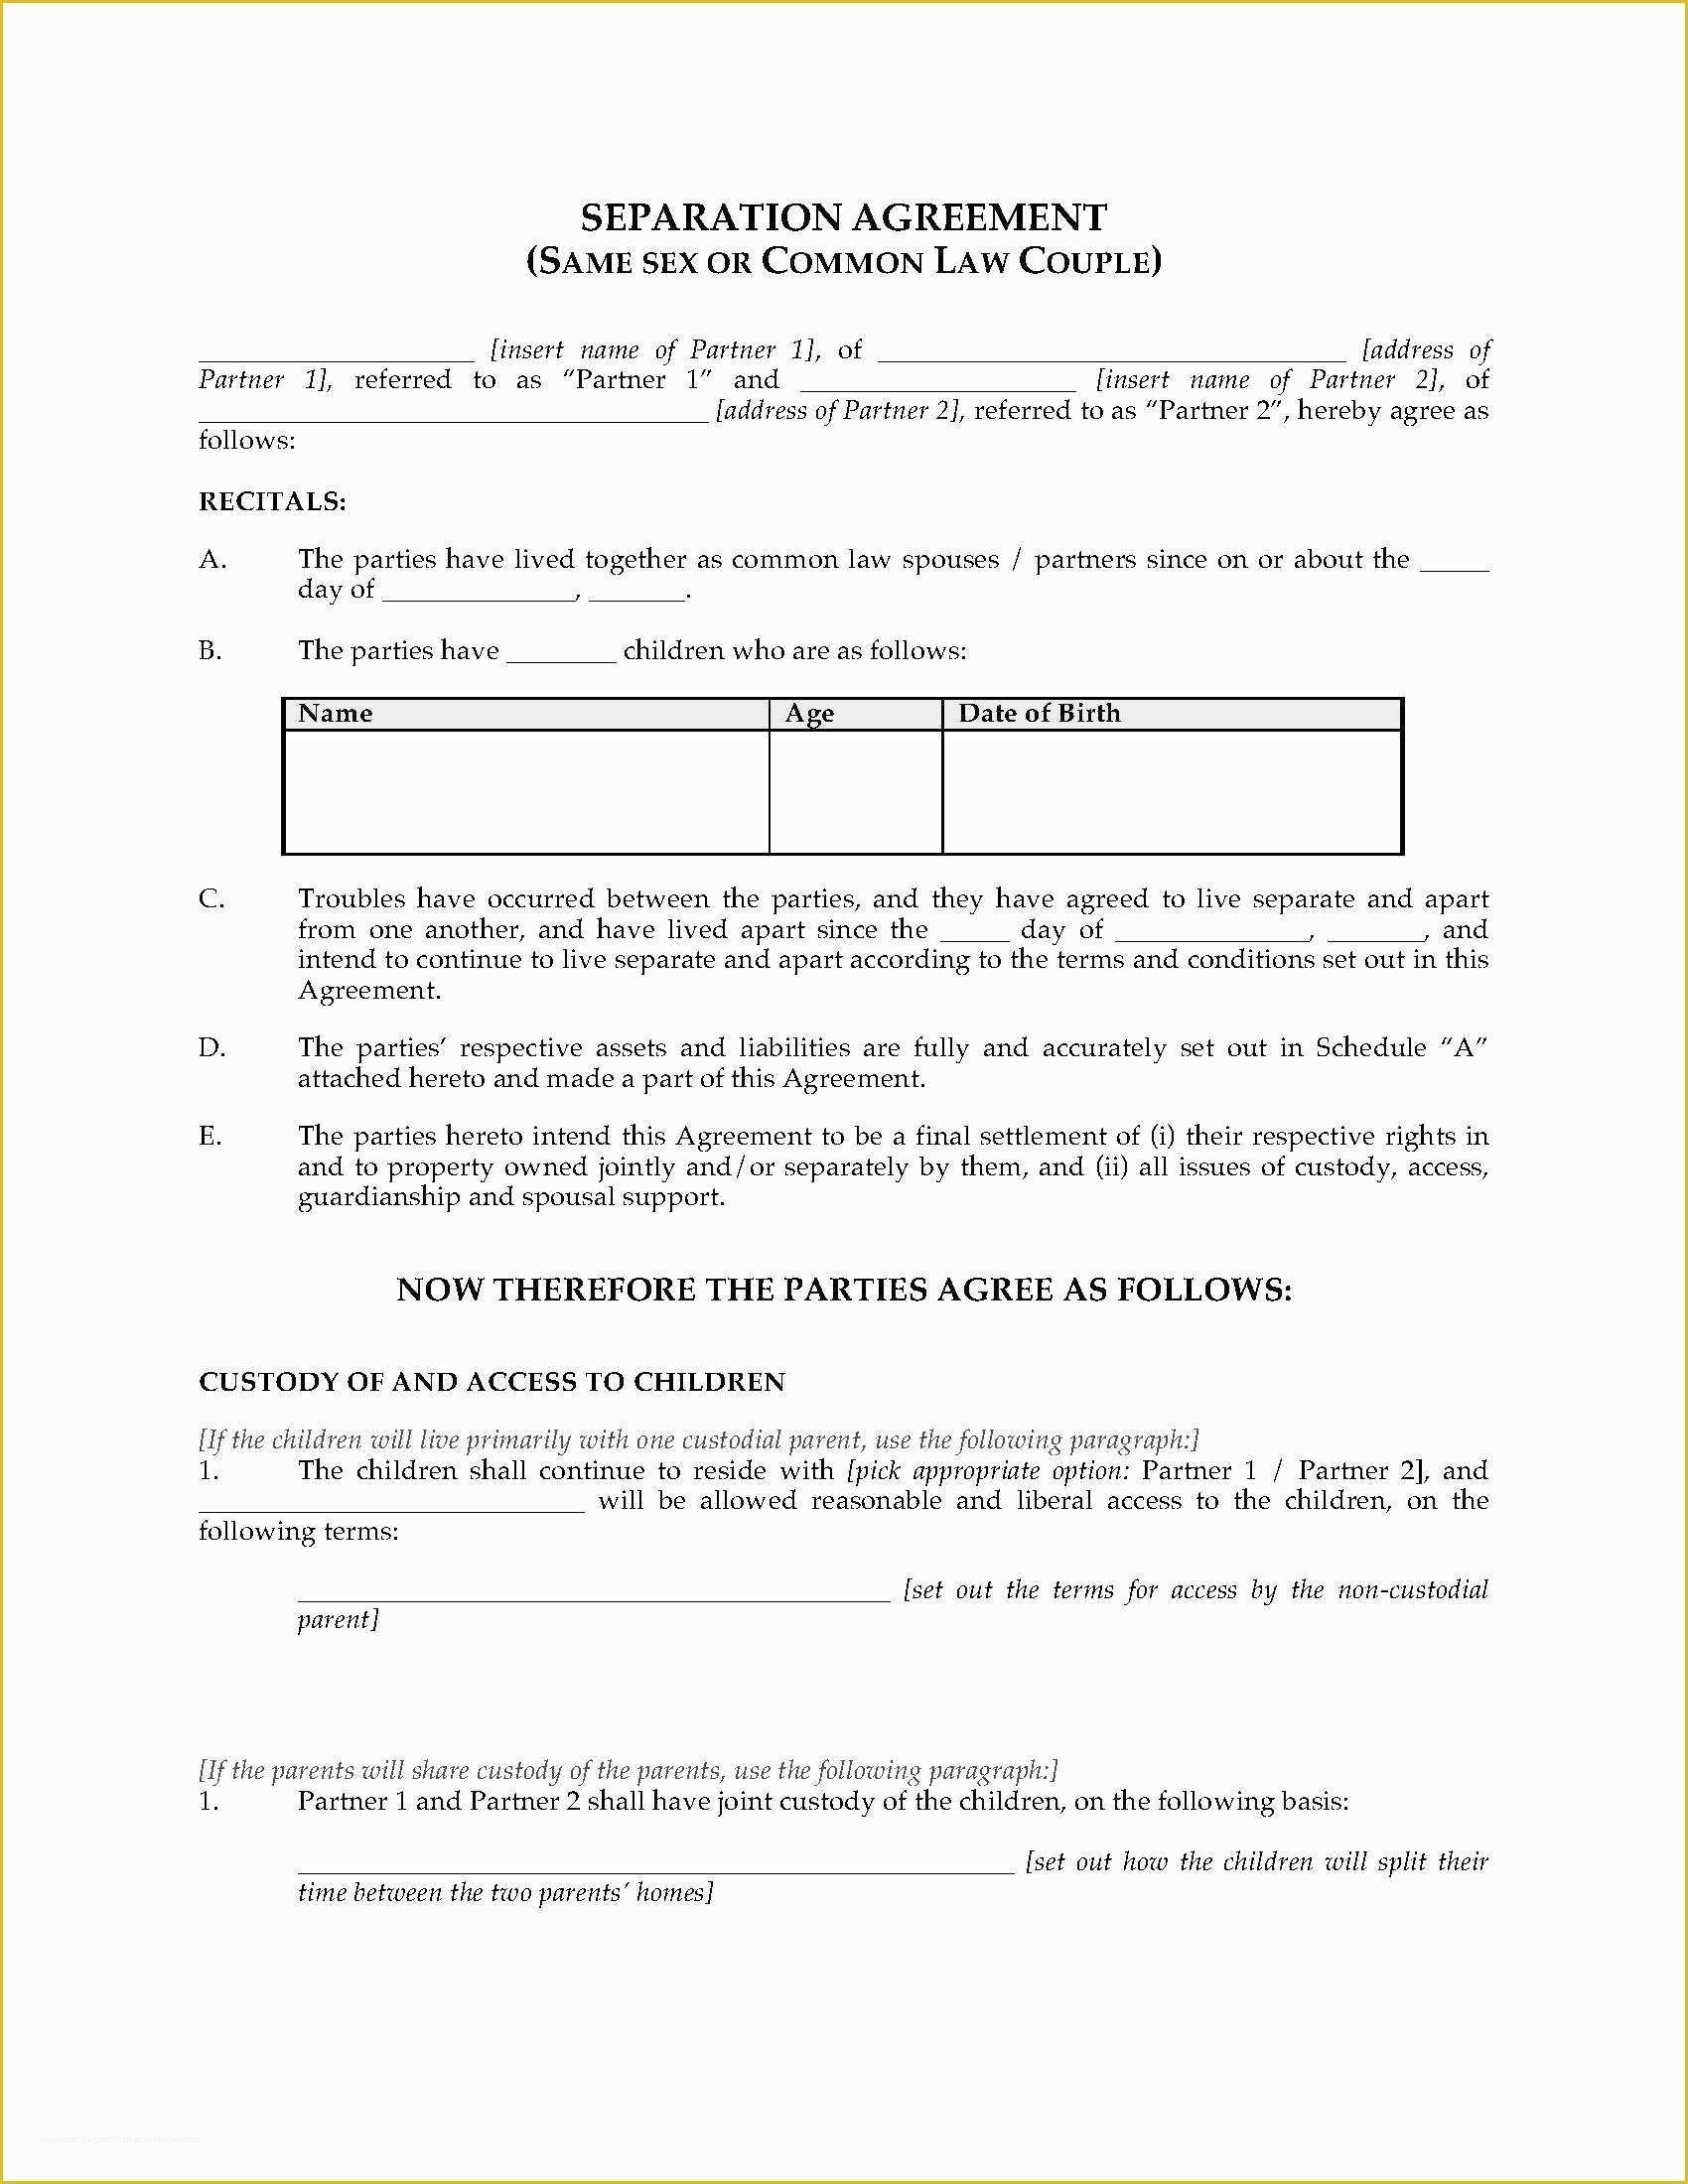 Free Separation Agreement Template Of Mon Law Separation Agreement Template Tario